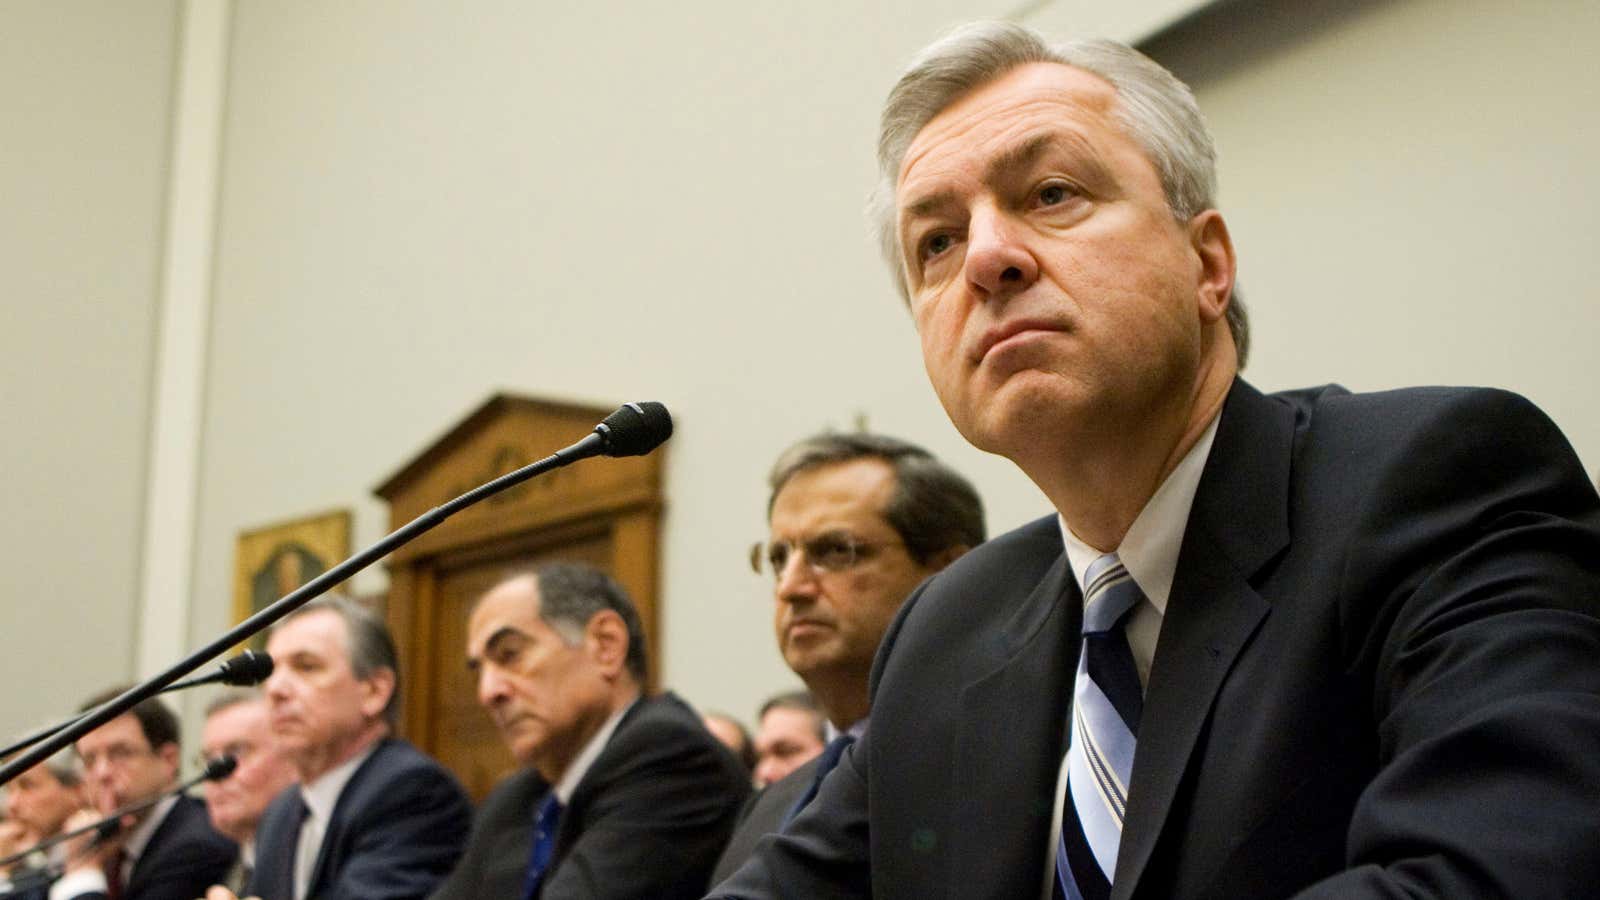 Wells Fargo CEO John Stumpf giving you all the disclosure you can handle.